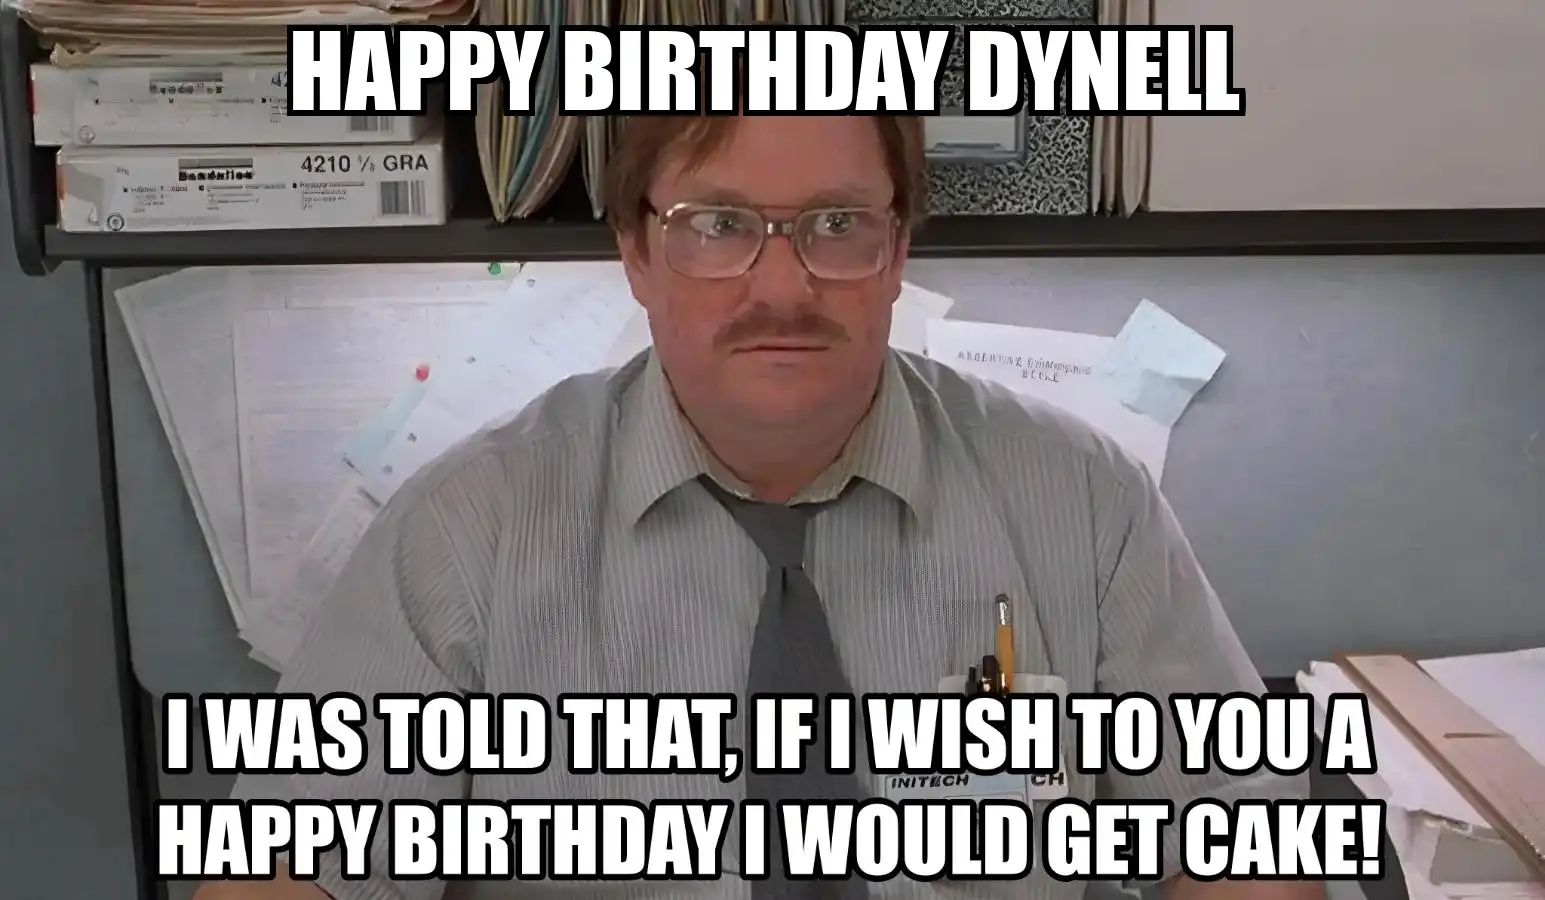 Happy Birthday Dynell I Would Get A Cake Meme